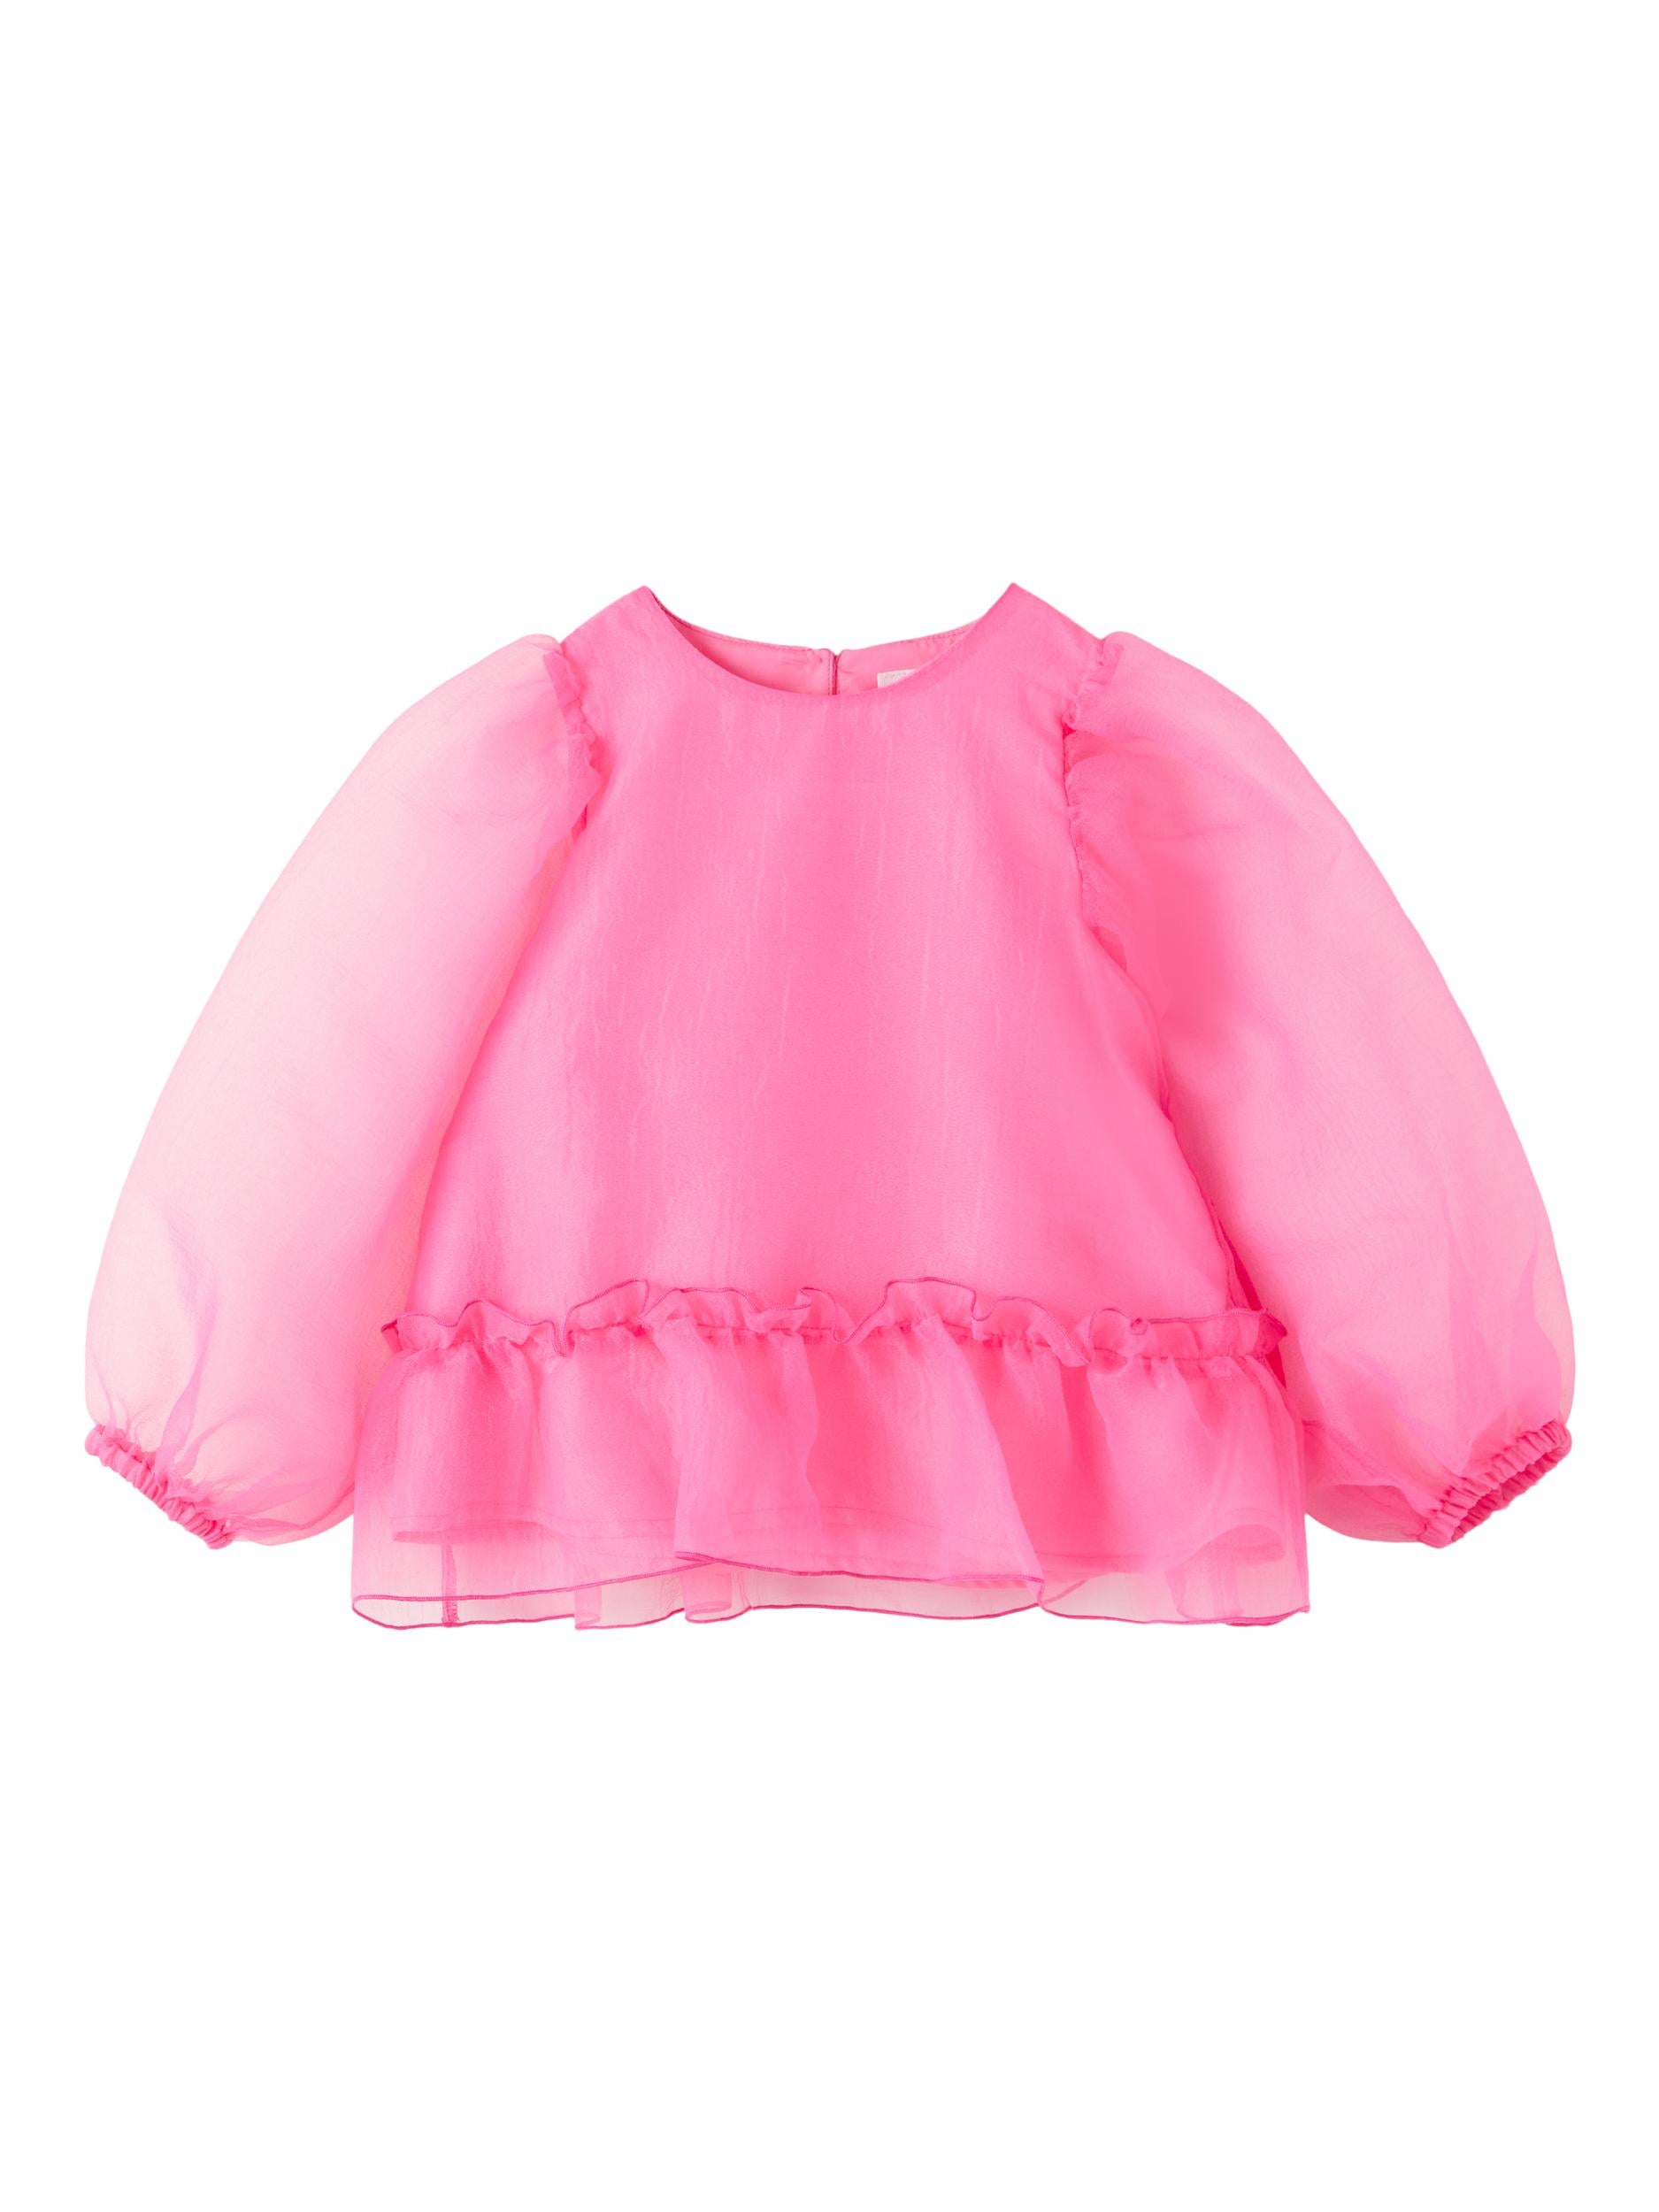 Girl's Runas Pink Top-Front View